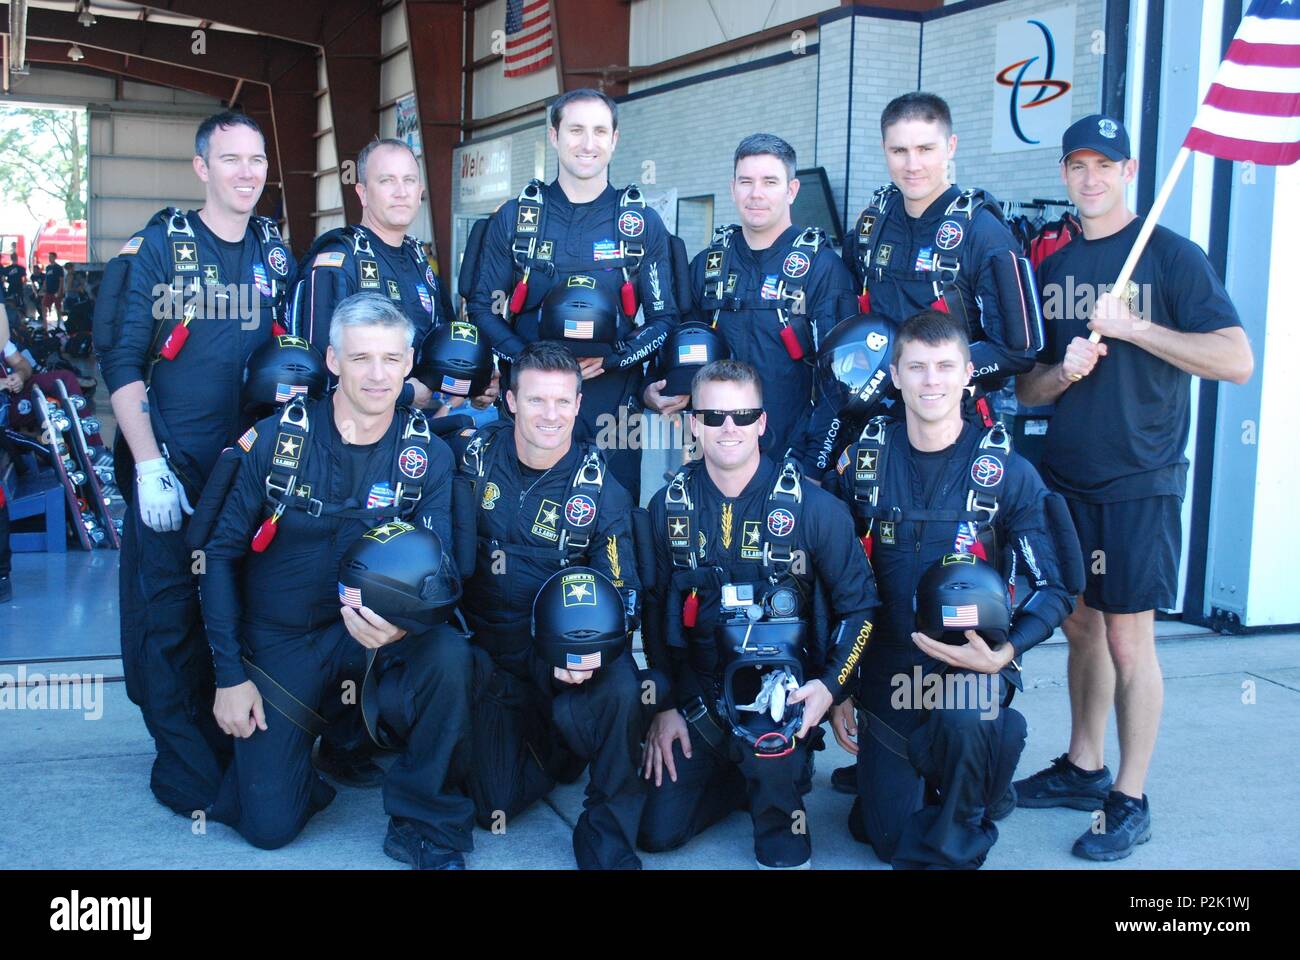 World Champion 8-Way Team   From left to right standing, members of the Golden Knights 8-way Formation Team Sgts. 1st Class Justin Blewitt, Larry Miller, Andrew Starr, Josh Coleman, Sean Sweeney, Ryan Ray, kneeling, Sgts. 1st Class Kurt Isenbarger, Matt Davidson, David Flynn, and Jeshua Stahler, pose for a group photo, Sep. 14, at Ottawa Illinois. Stock Photo